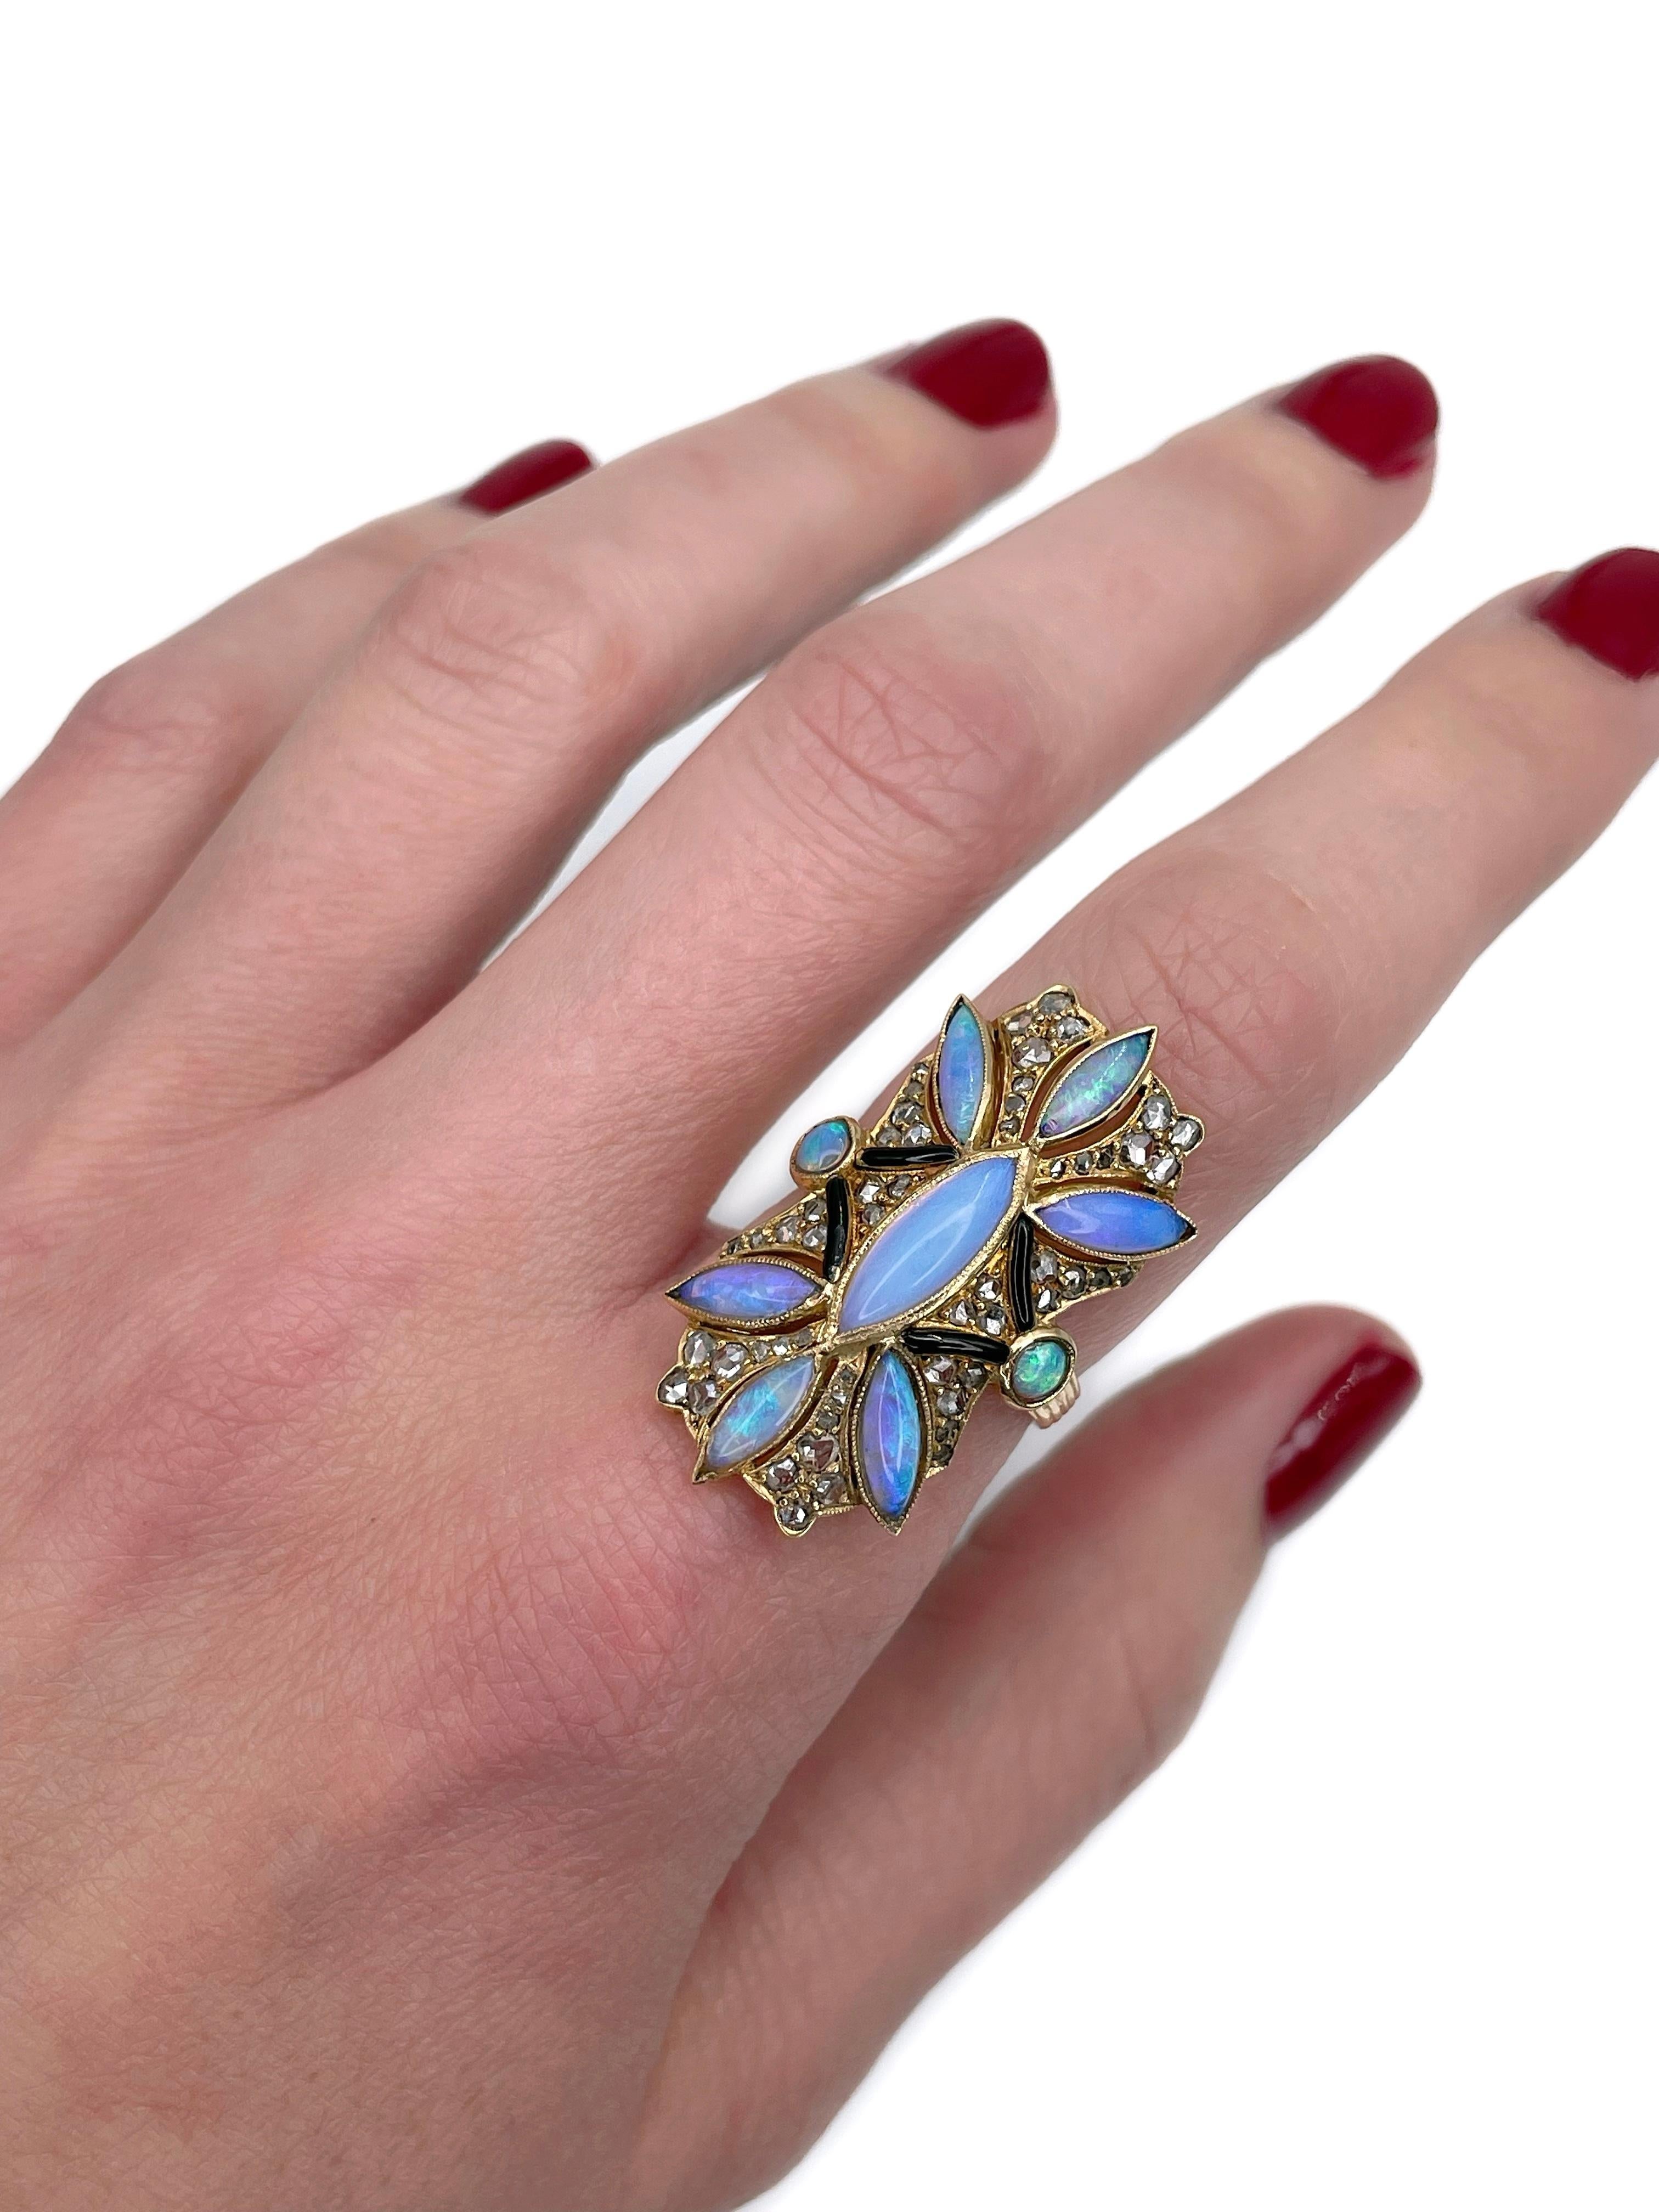 This is a stunning Victorian cocktail ring crafted in 18K gold. Circa 1890. It features opals, rose cut diamonds and black enamel. 

Weight: 7.49g 
Size: 17.25 (US 6.75)

IMPORTANT: please ask about the possibility to resize before purchase. This